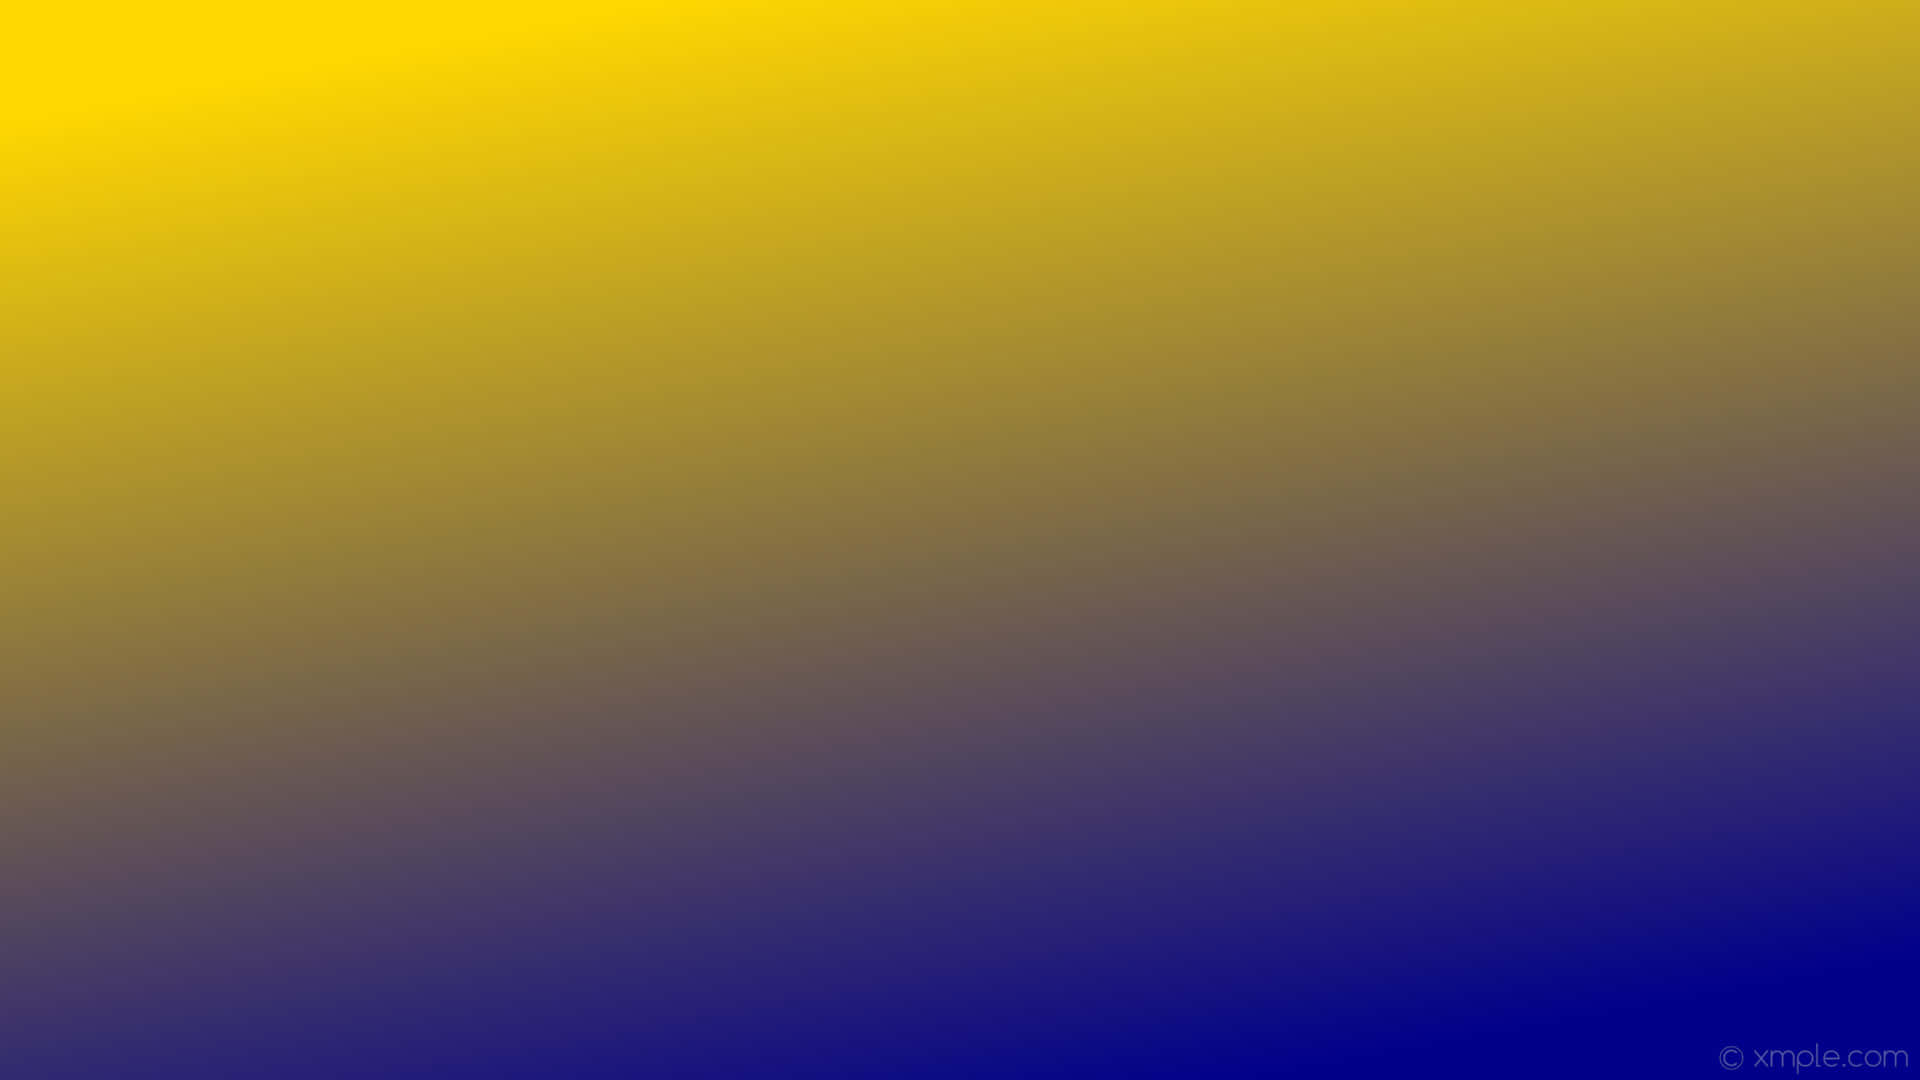 Enjoy the Calm of a Yellow Gradient